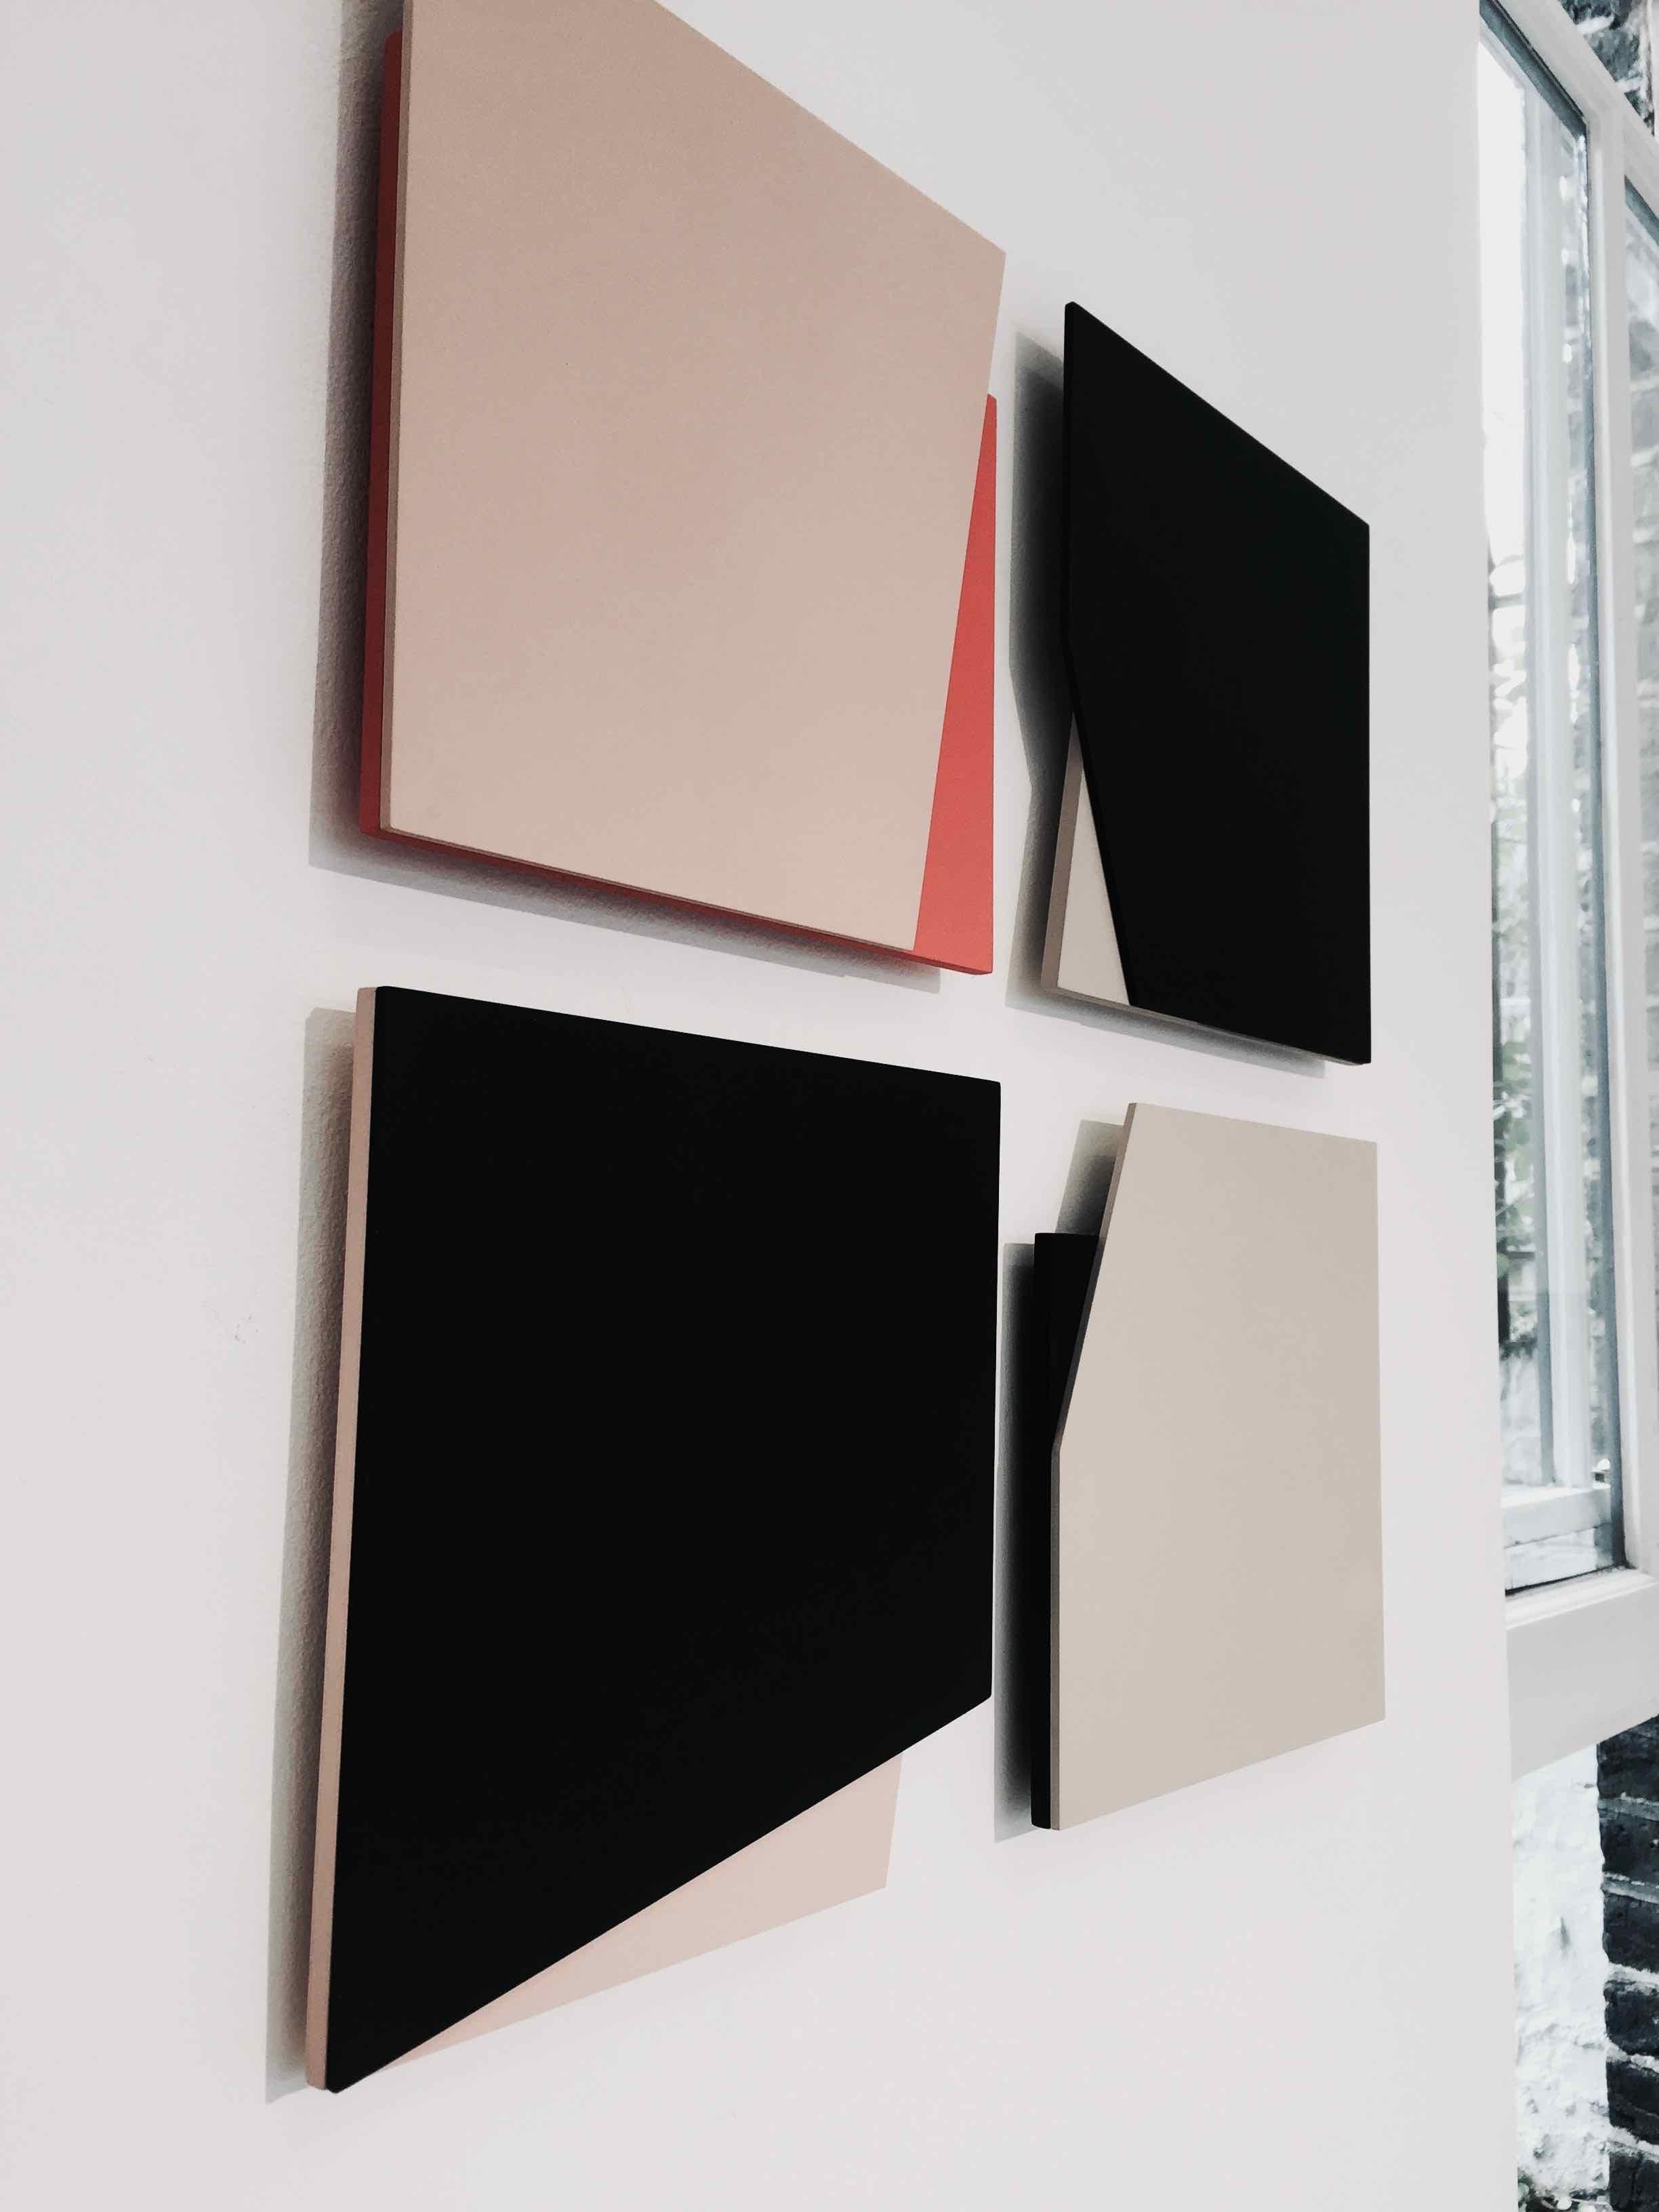 Laura Jane Scott Abstract Sculpture - 'Cut-out 20': Set of Four Minimal Hard Edge Abstract Paintings